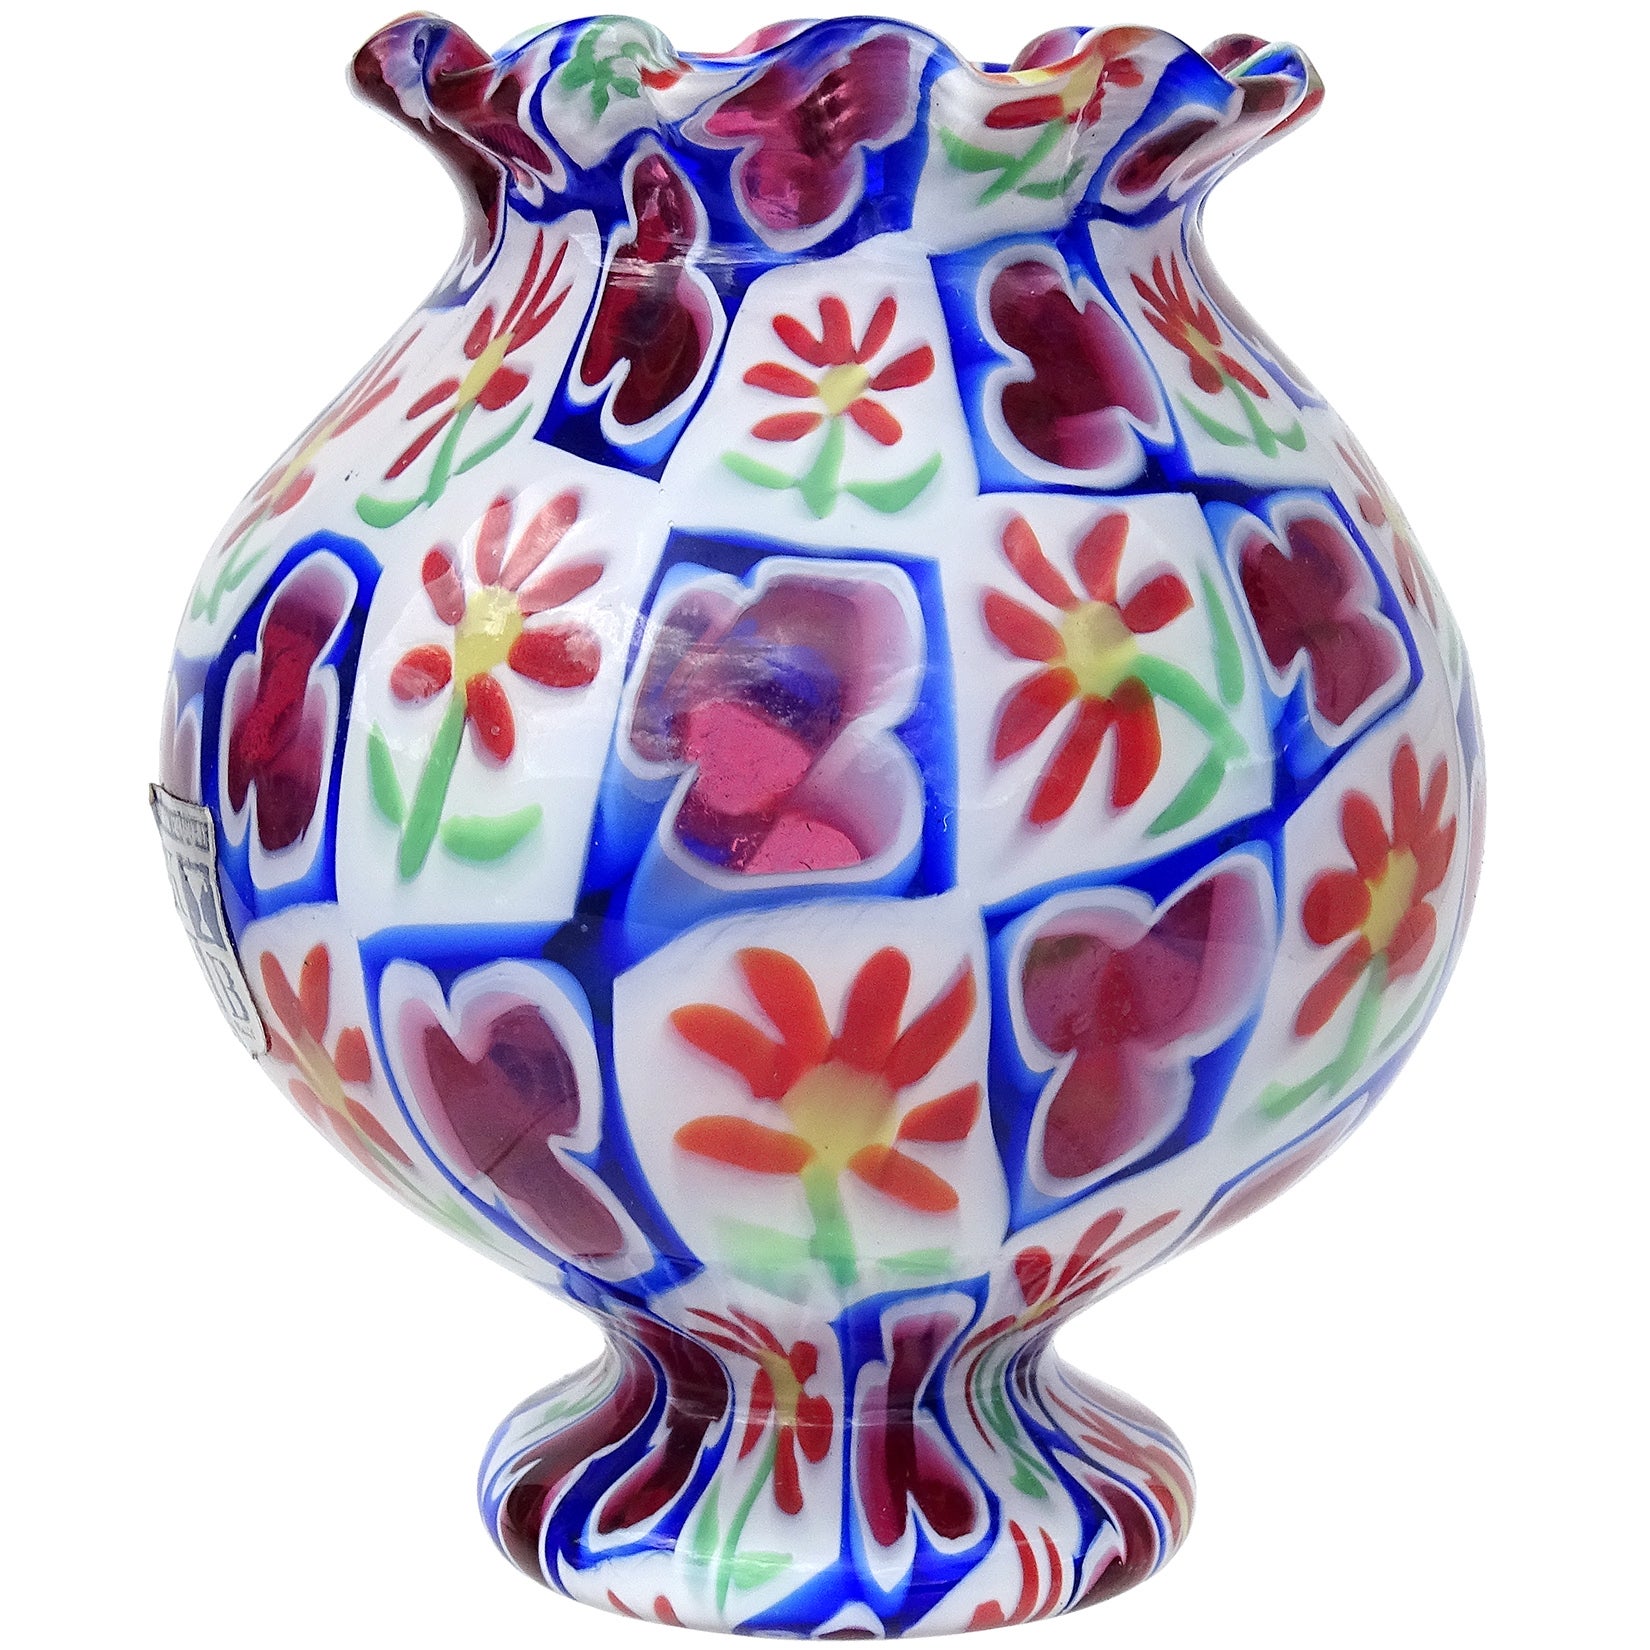 Toso Murano Millefiori Daisy Clover Flower Mosaic Italian Art Glass Footed Vase For Sale